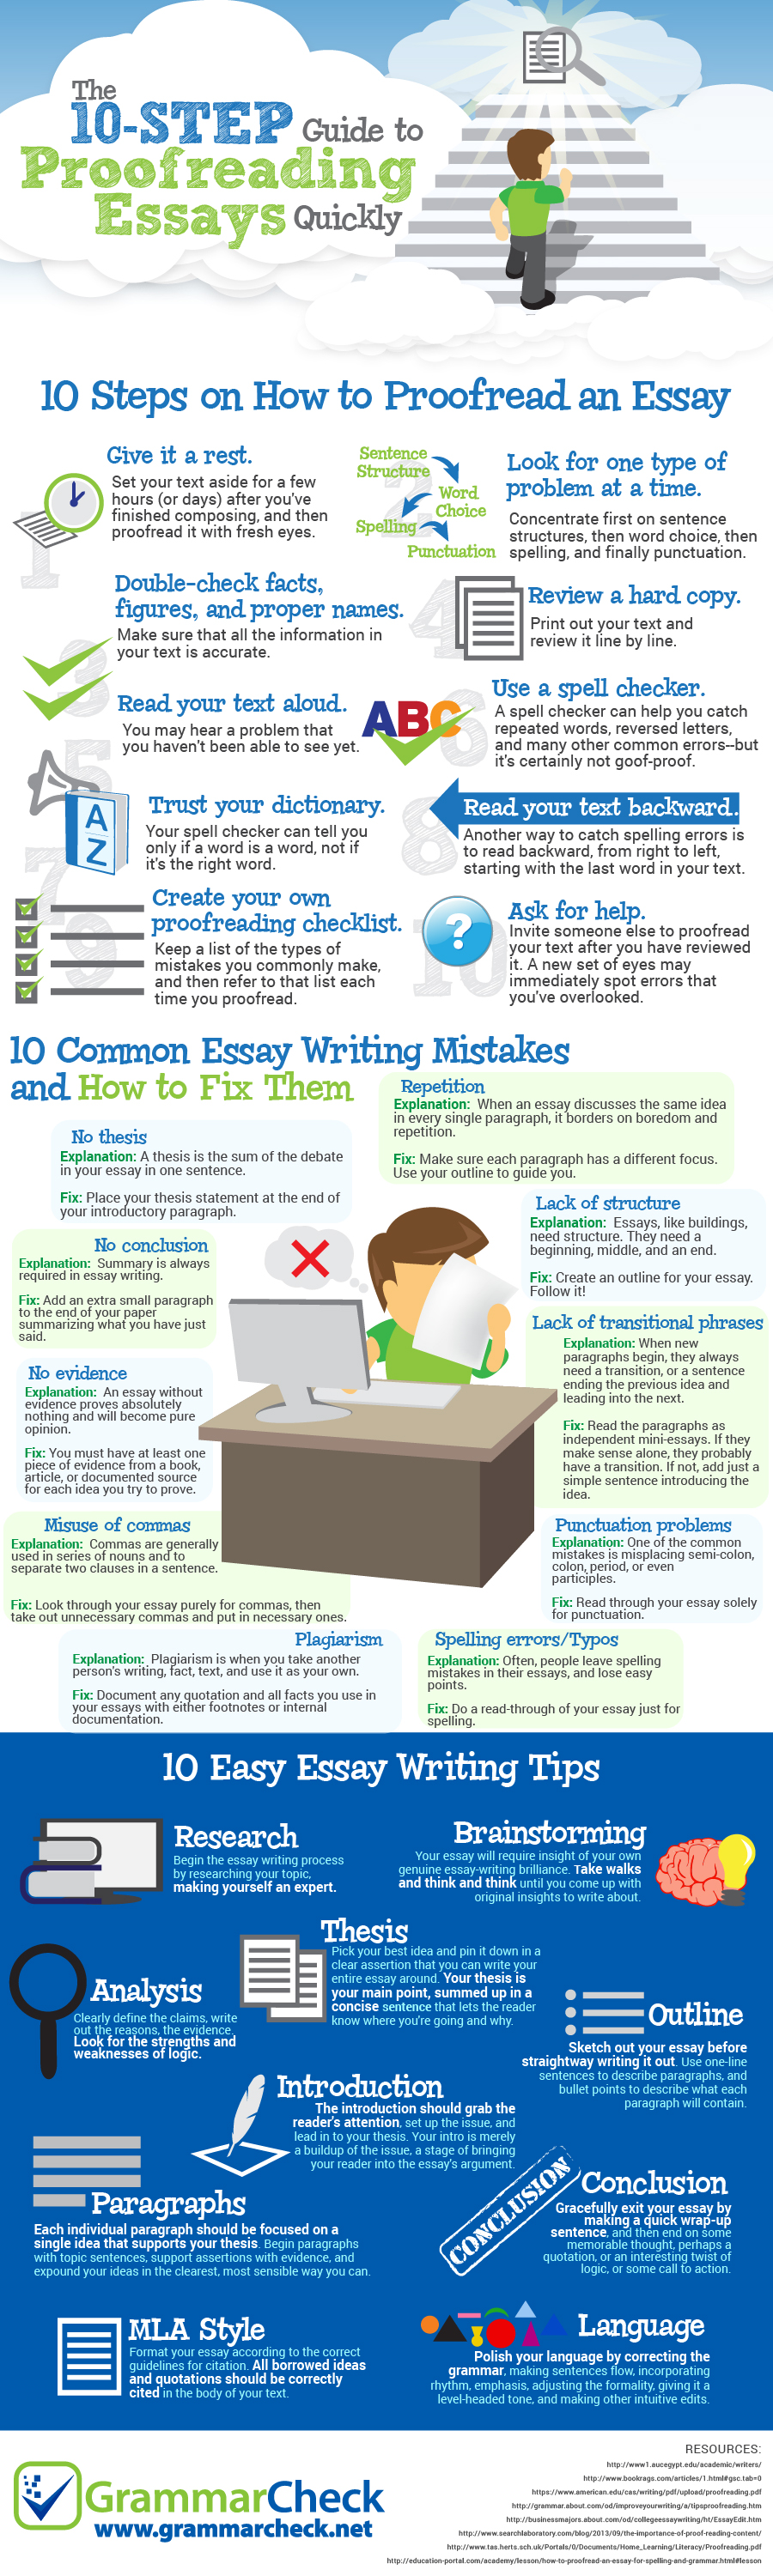 The 10-Step Guide to Proofreading Essays Quickly Infographic